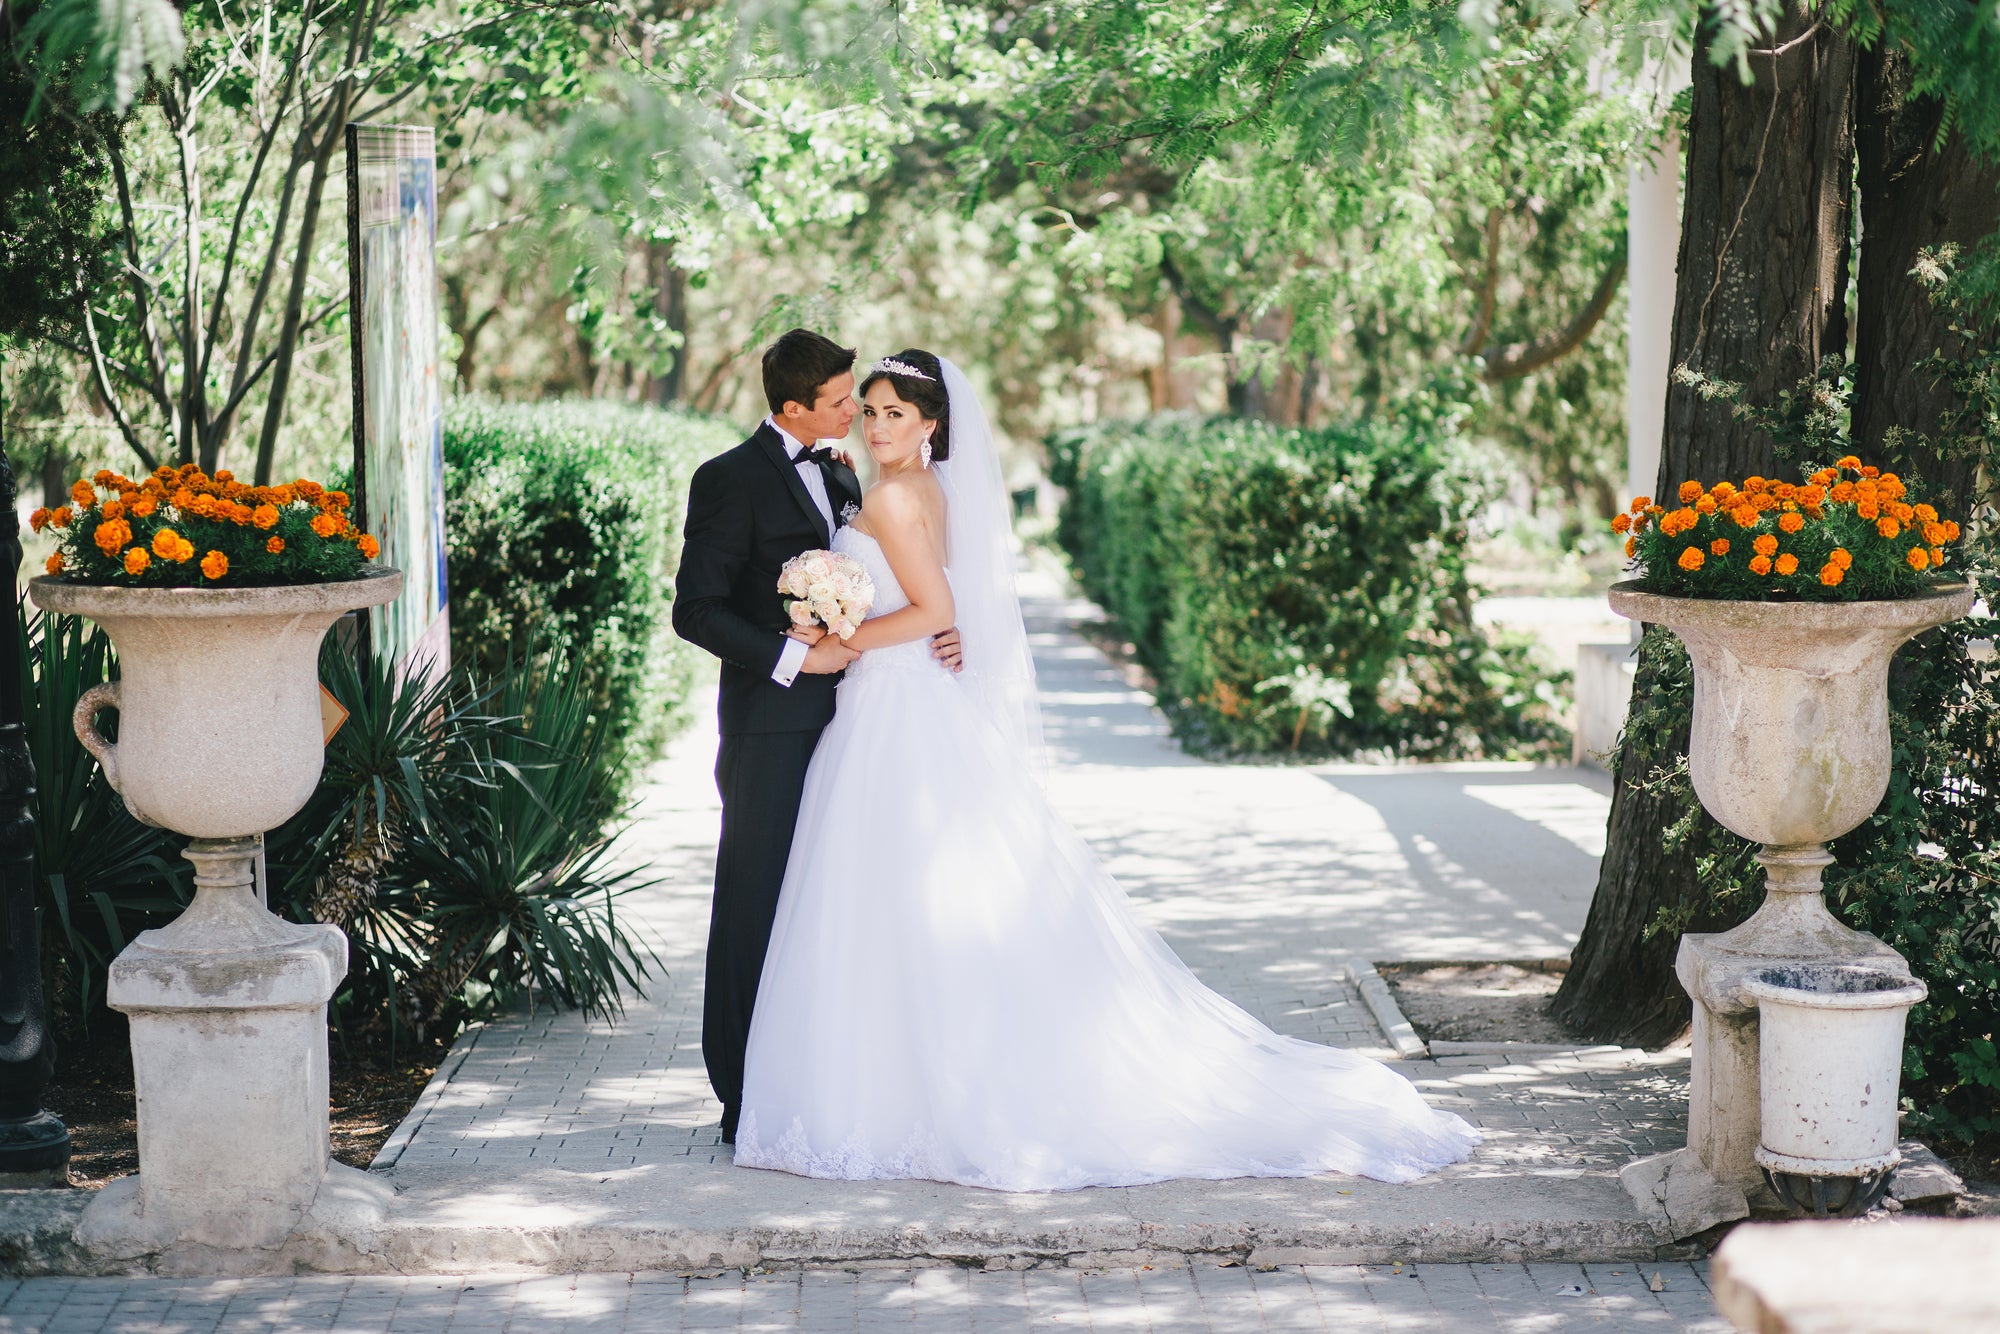 7 Ways Brides and Grooms Integrate Sustainability Into Their Weddings